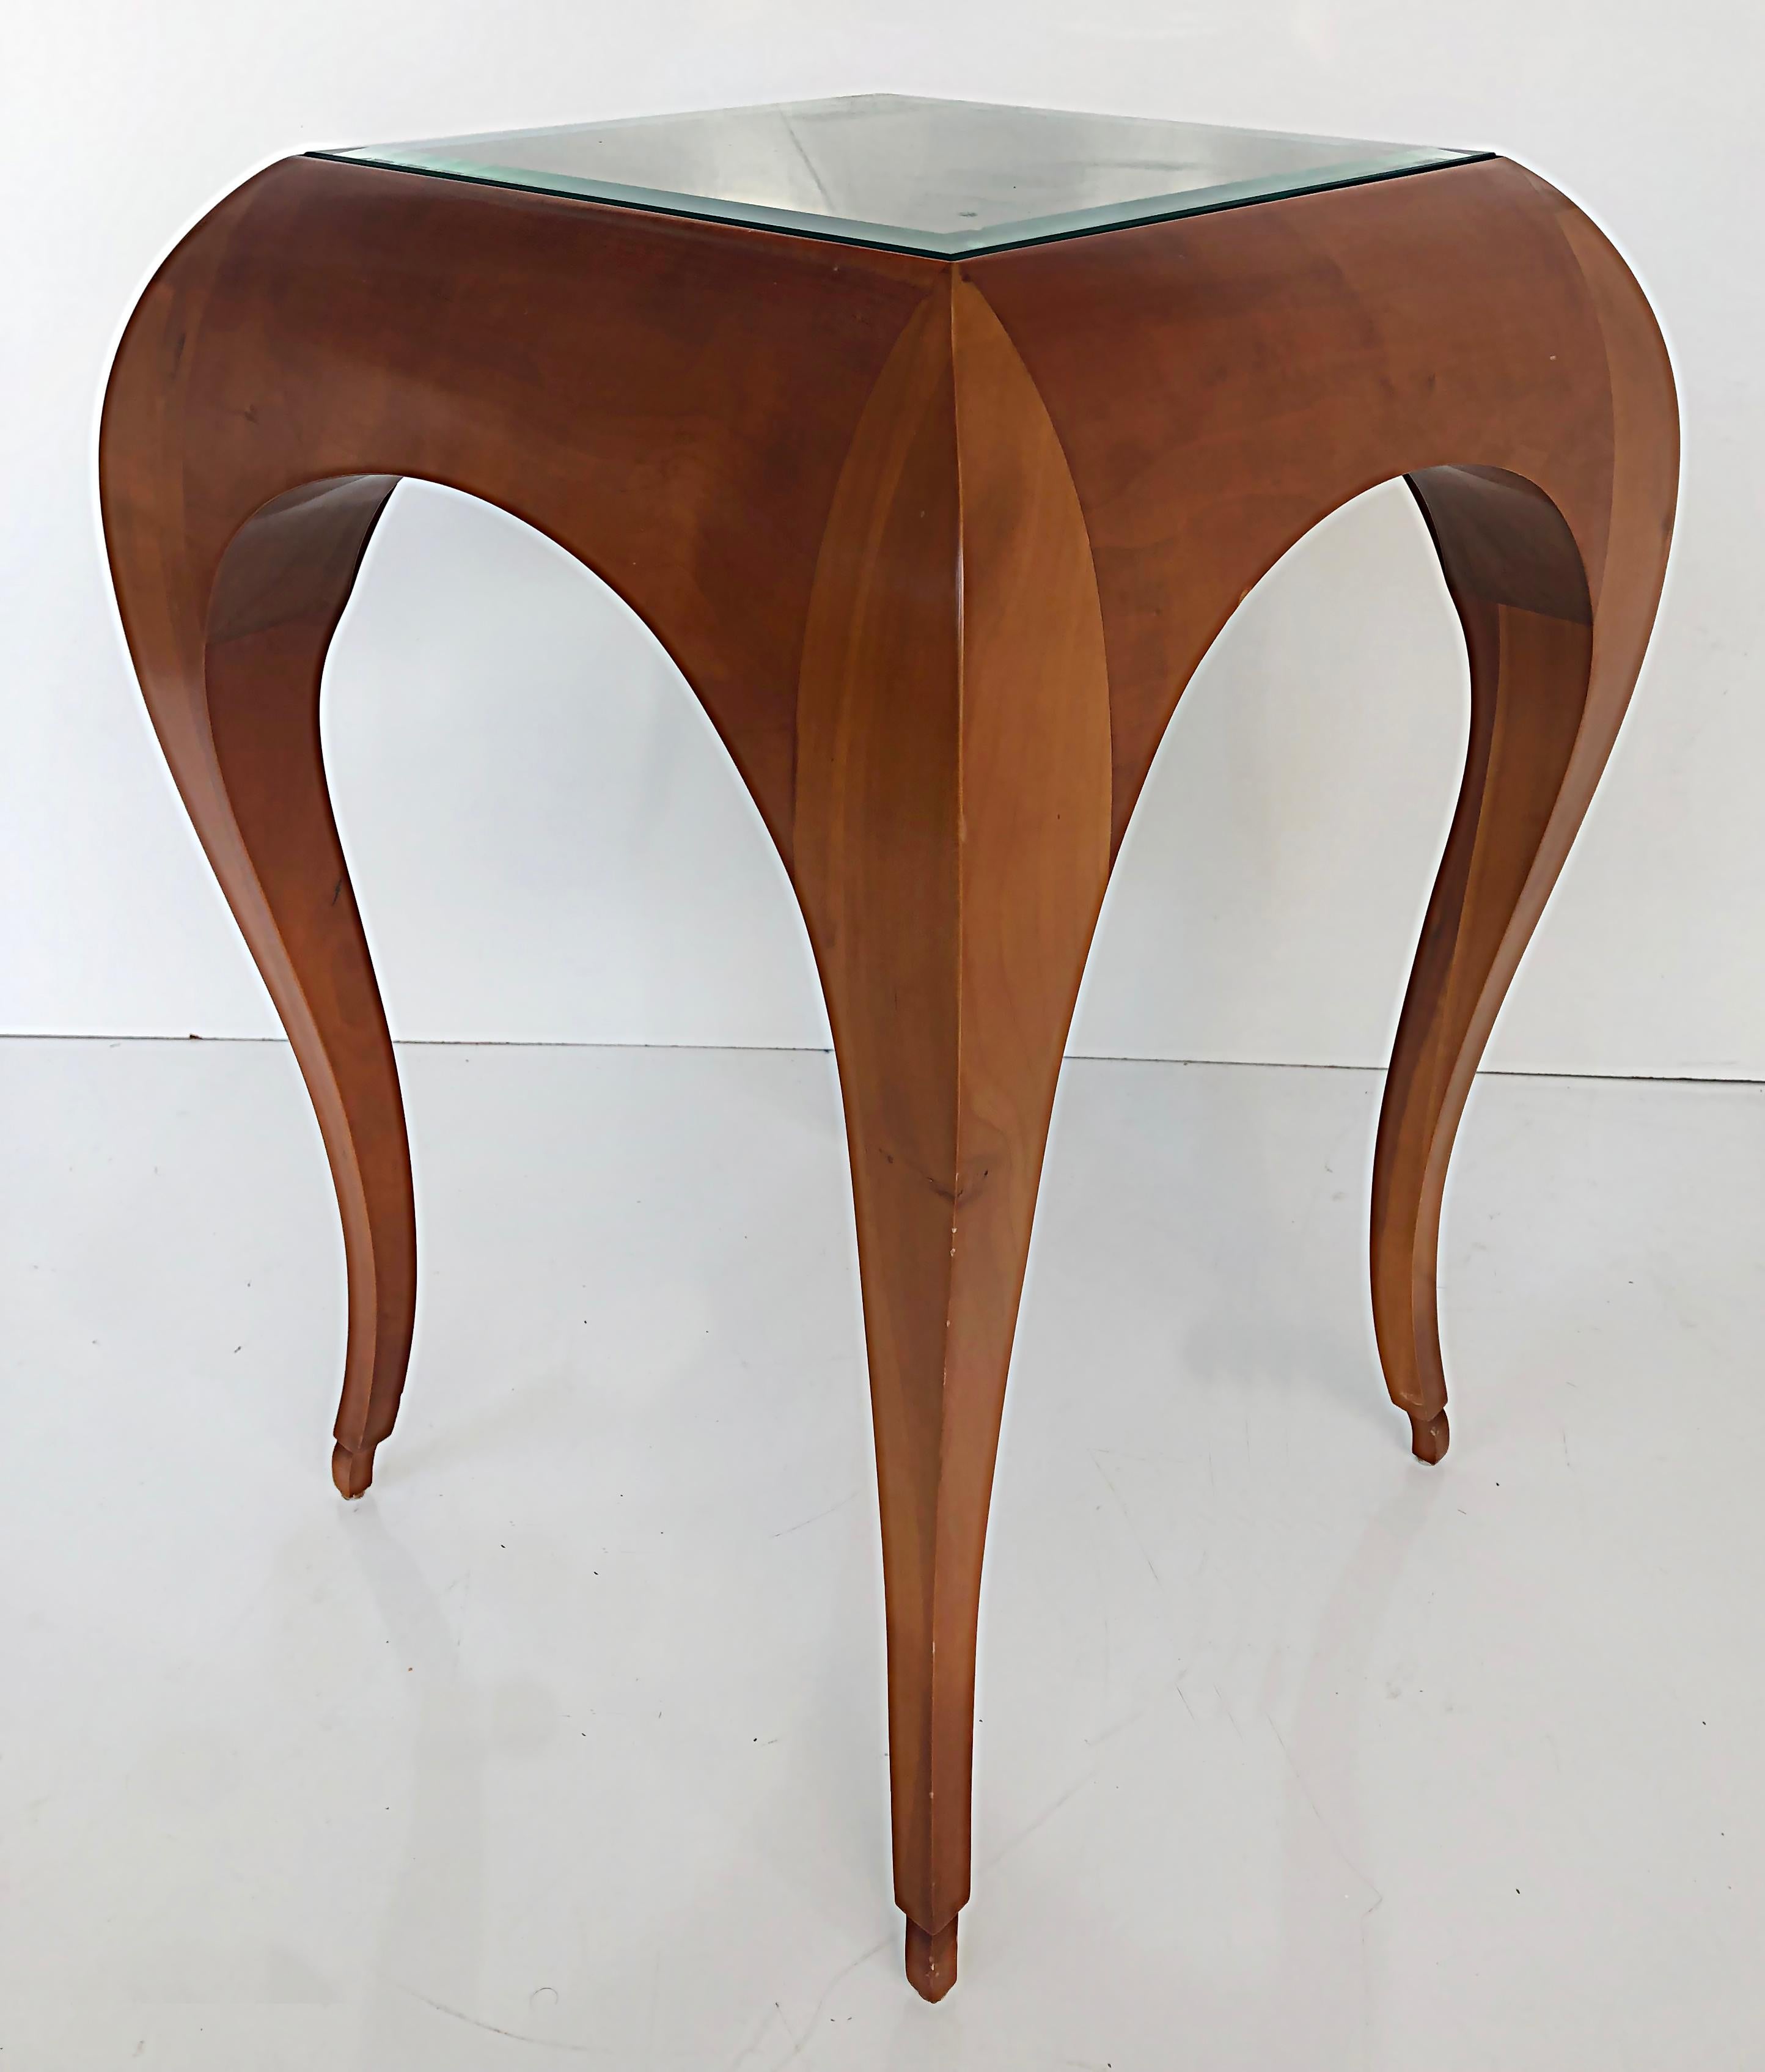 Stylized Curved Wood Side Tables, Manner of René Prou 1